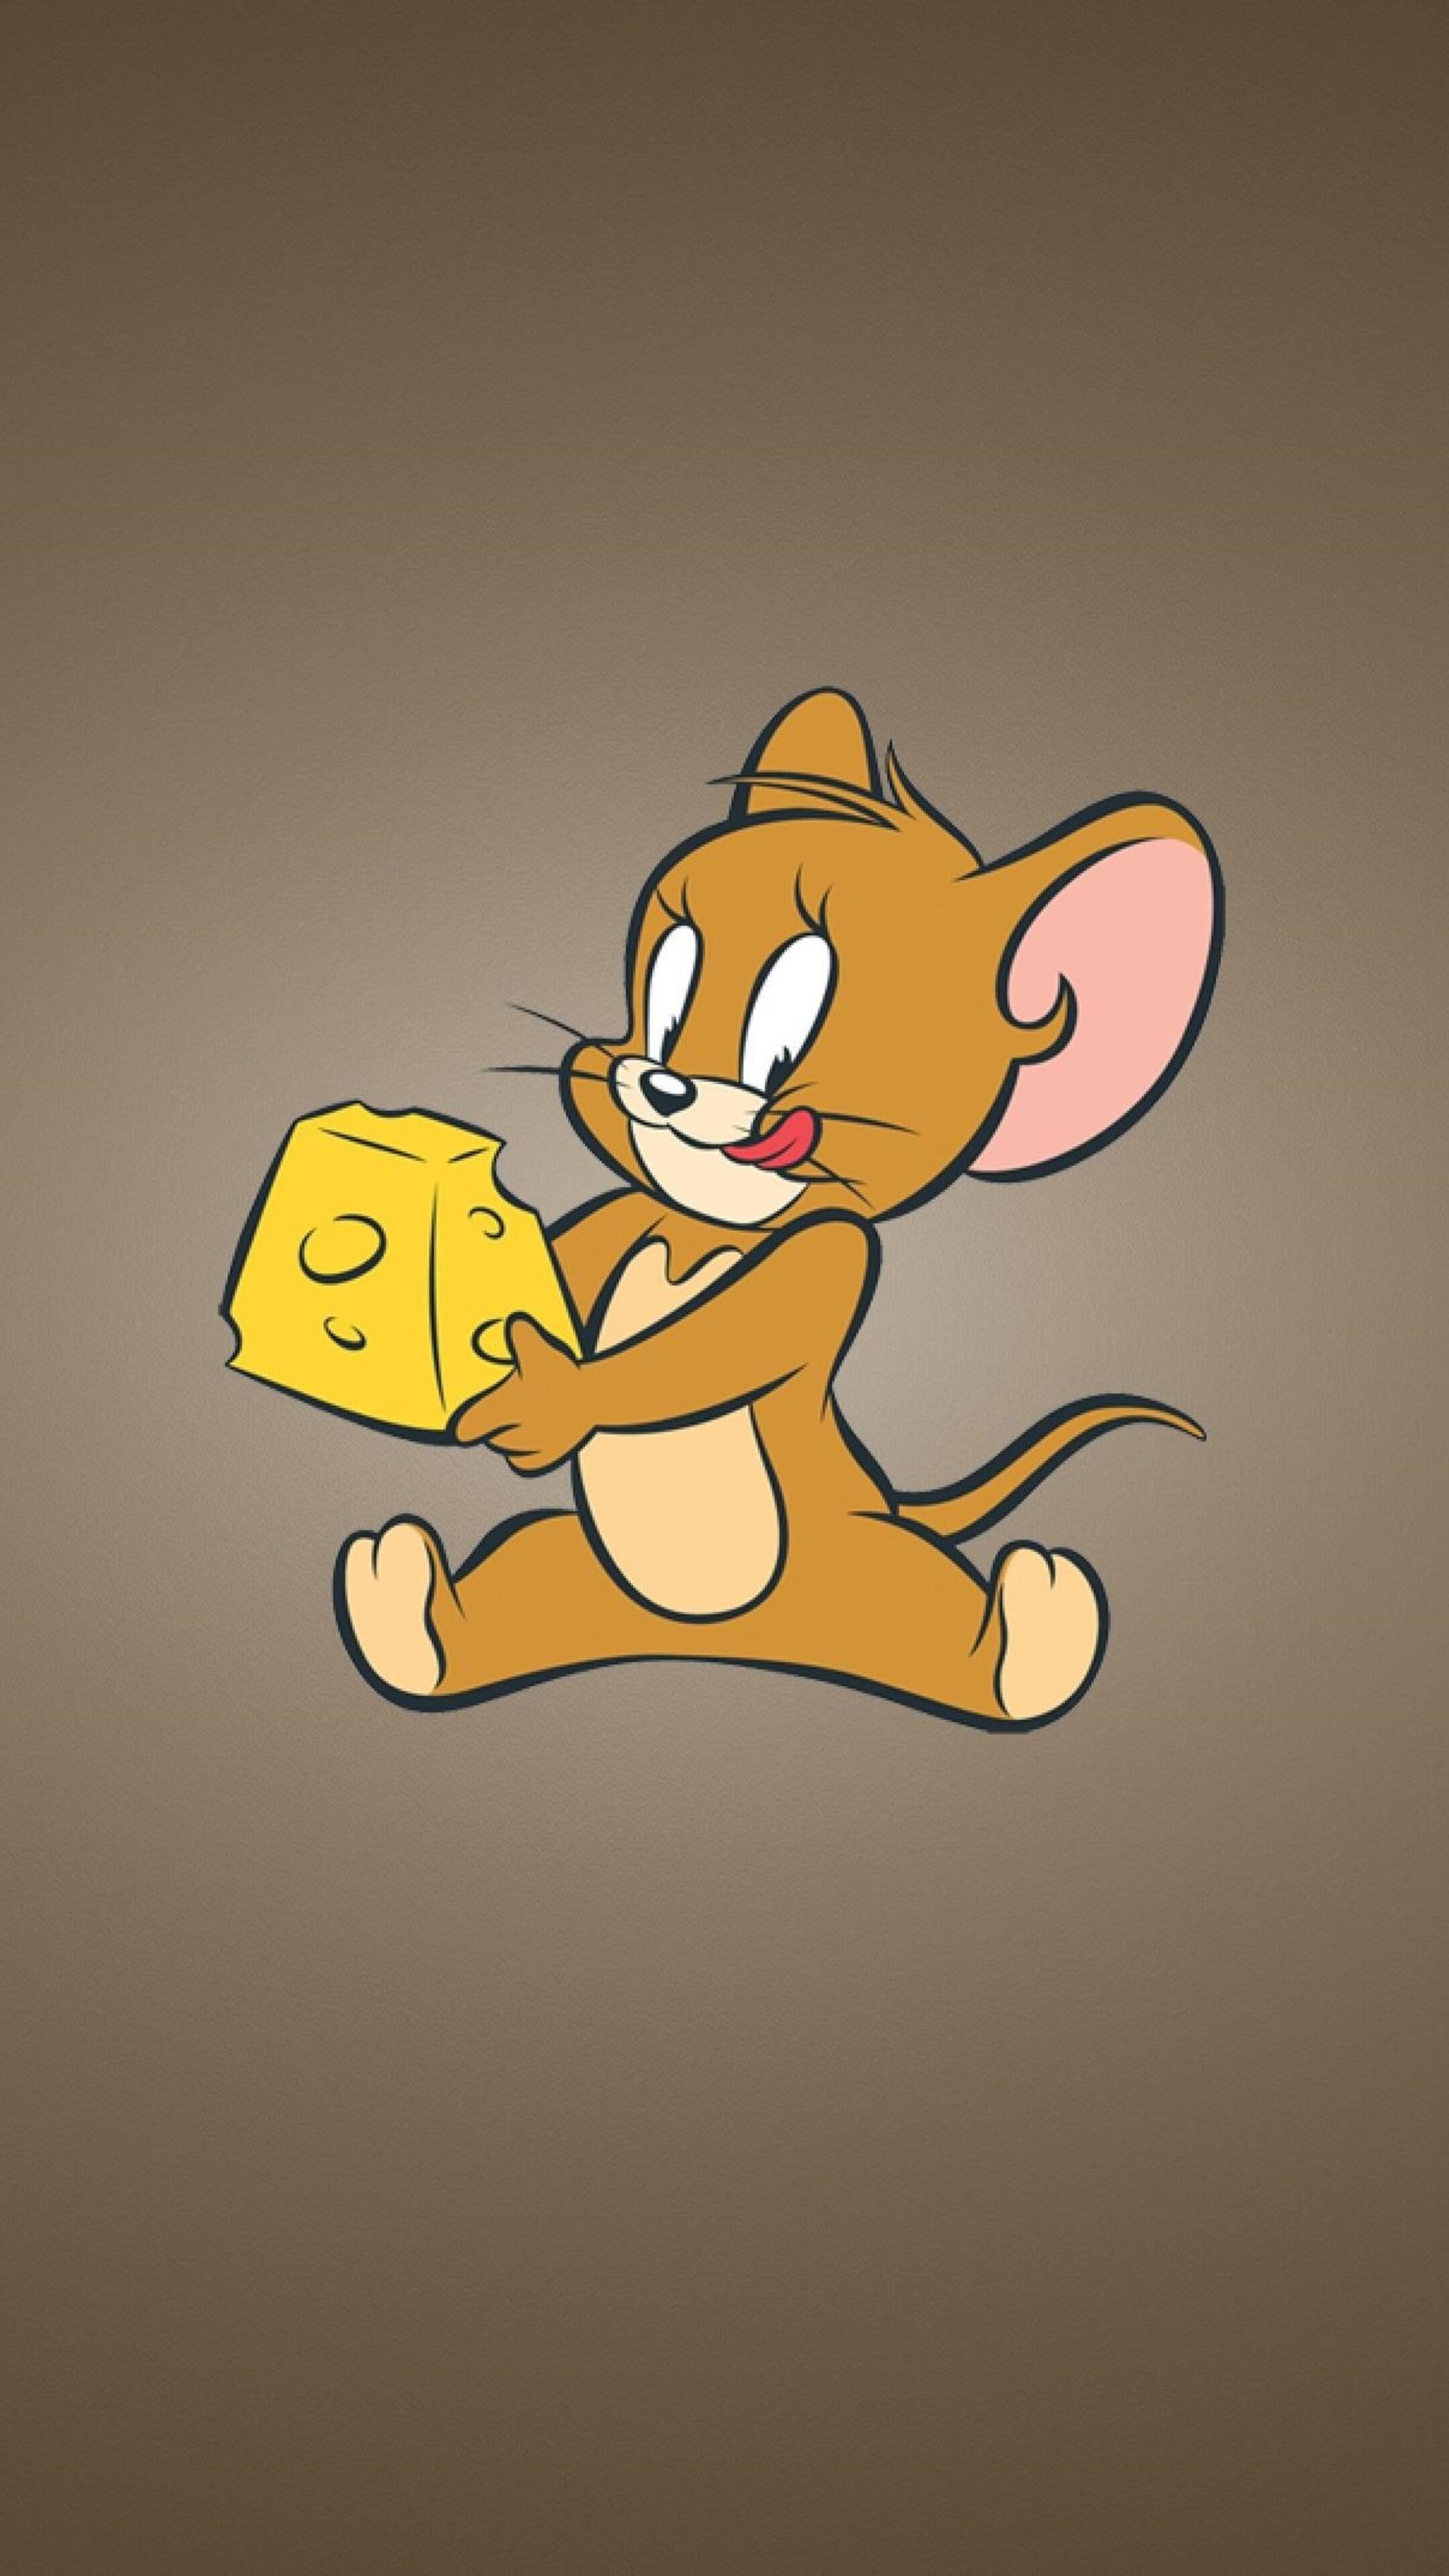 Tom and Jerry Sony Xperia wallpaper, Premium high definition, Stylish design, Mobile customization, 2160x3840 4K Handy